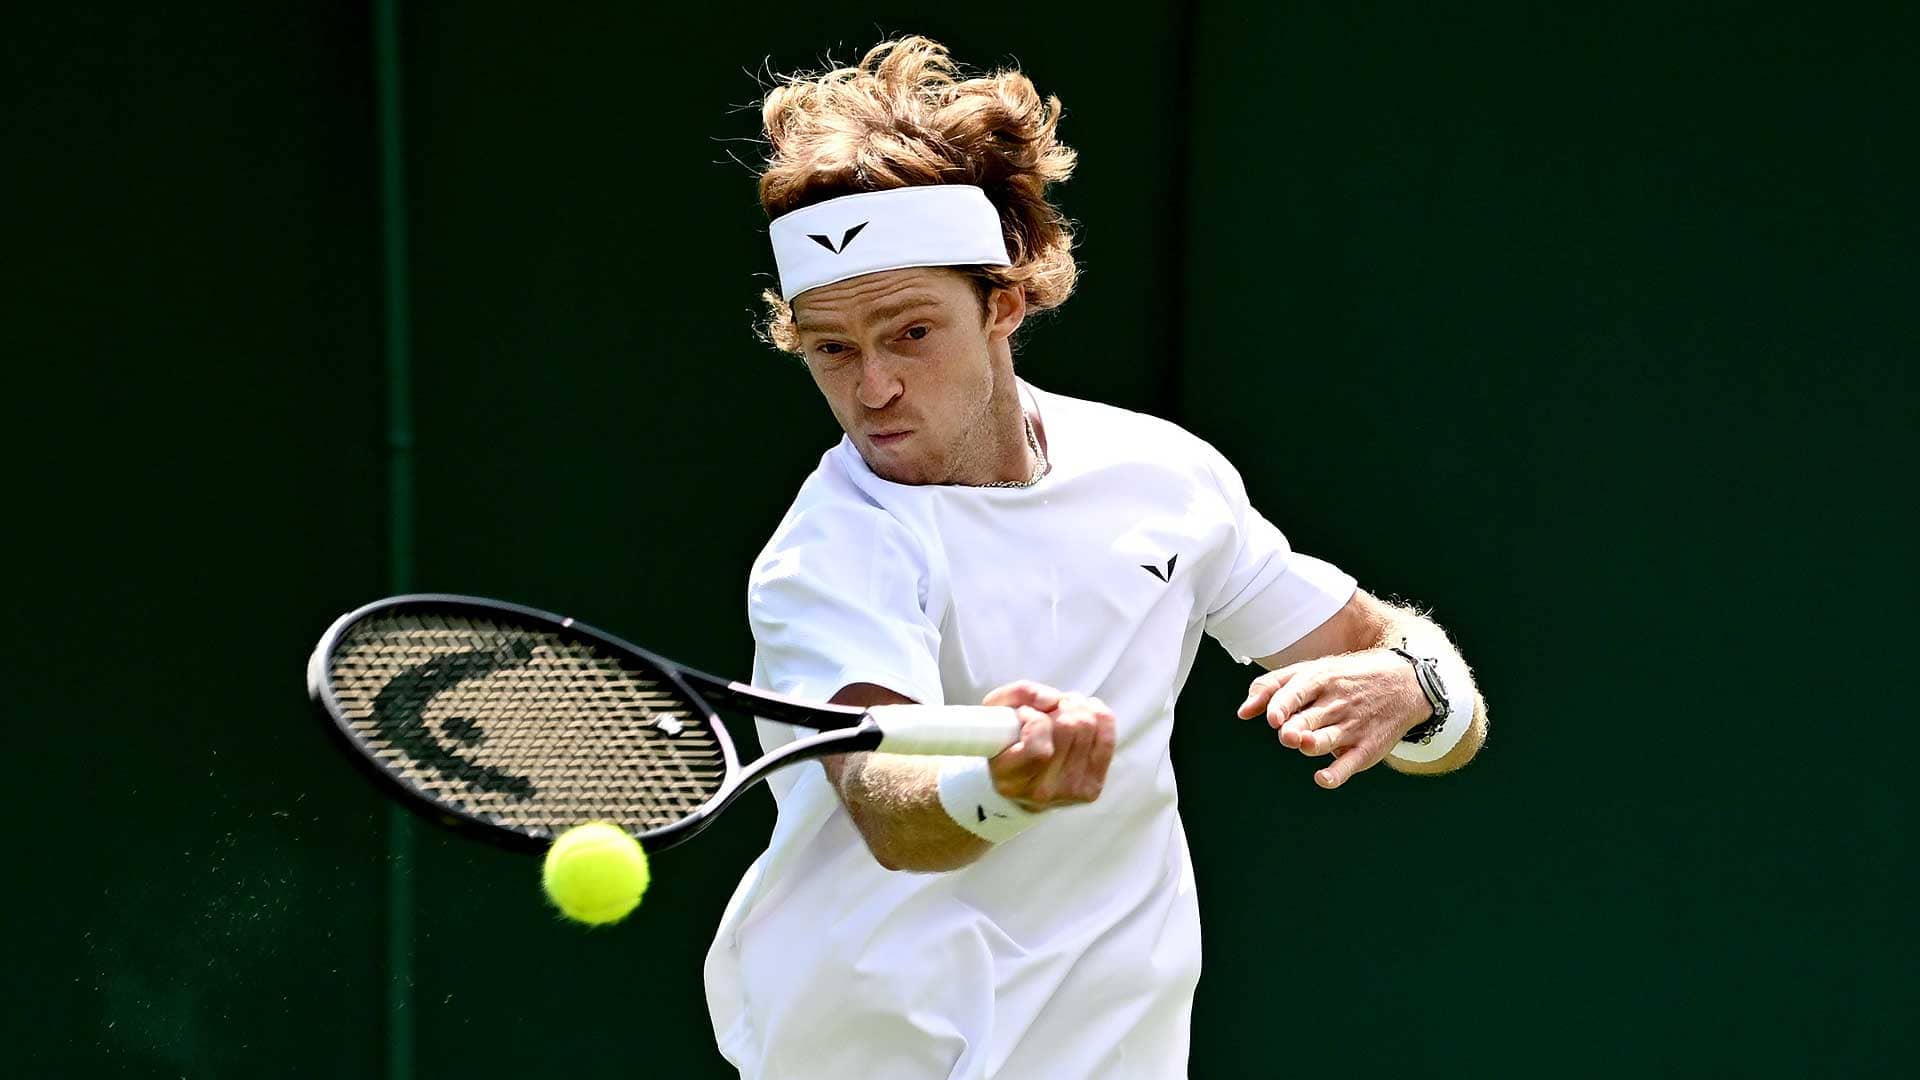 Andrey Rublev defeated Max Purcell in his first-round match at Wimbledon.